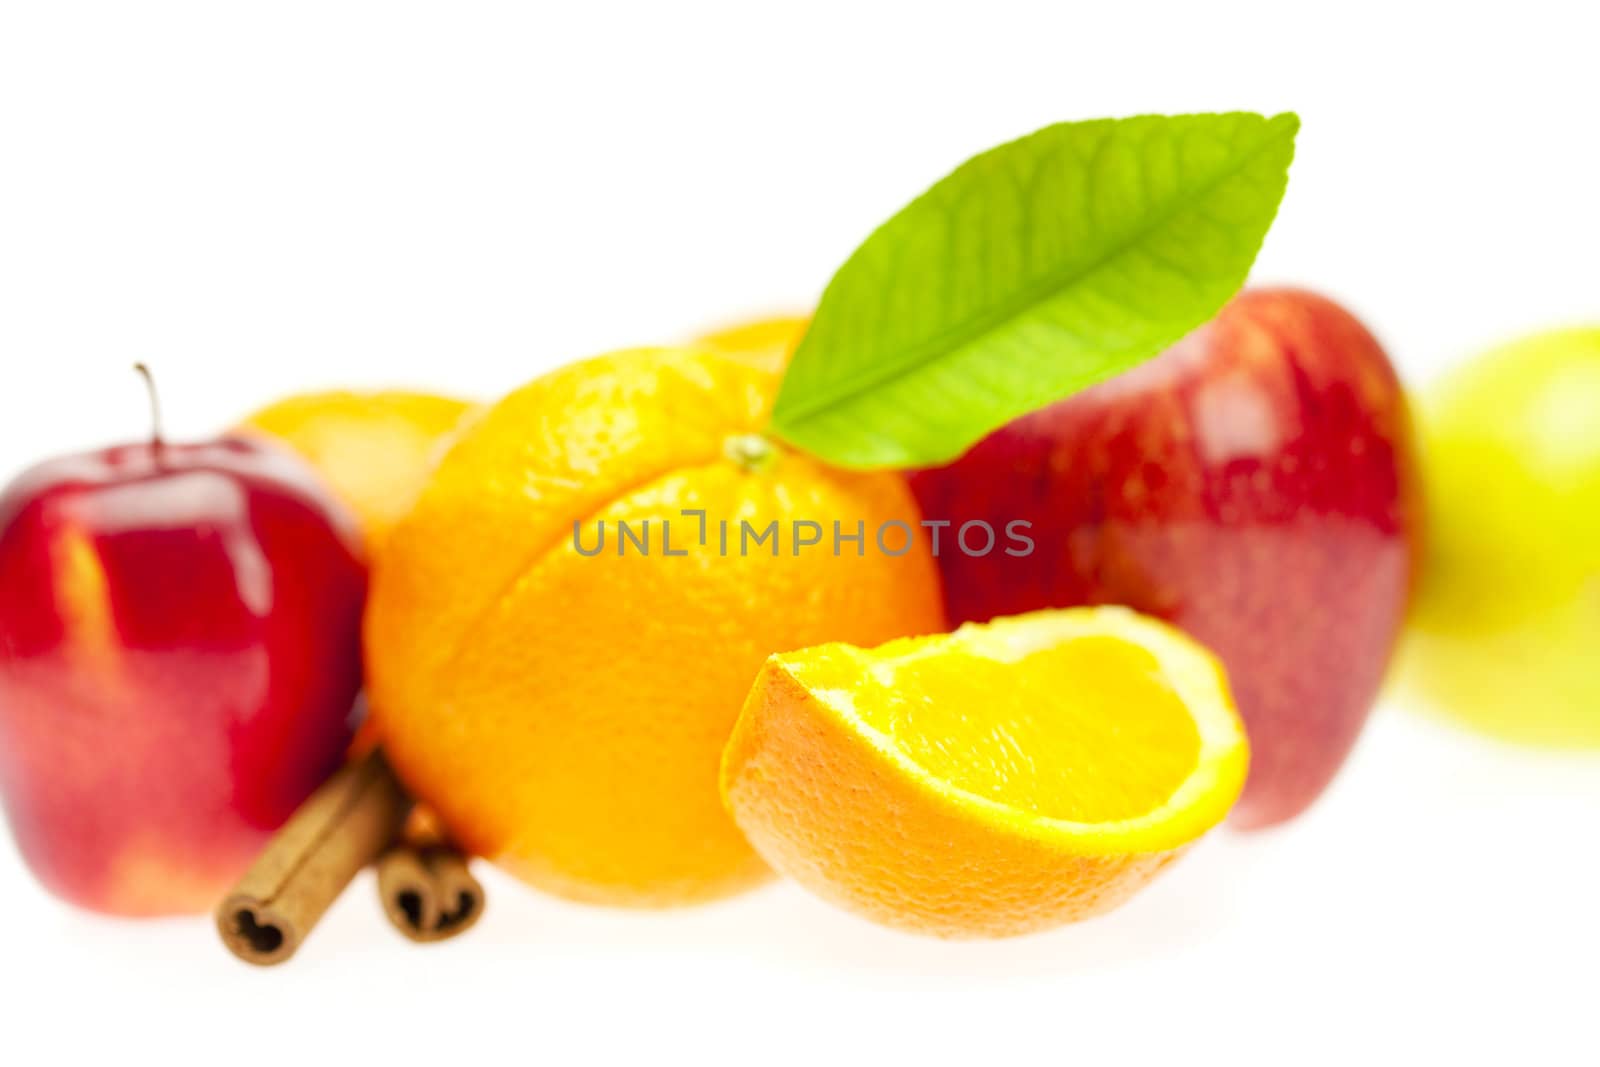 oranges, cinnamon sticks and apples  isolated on white